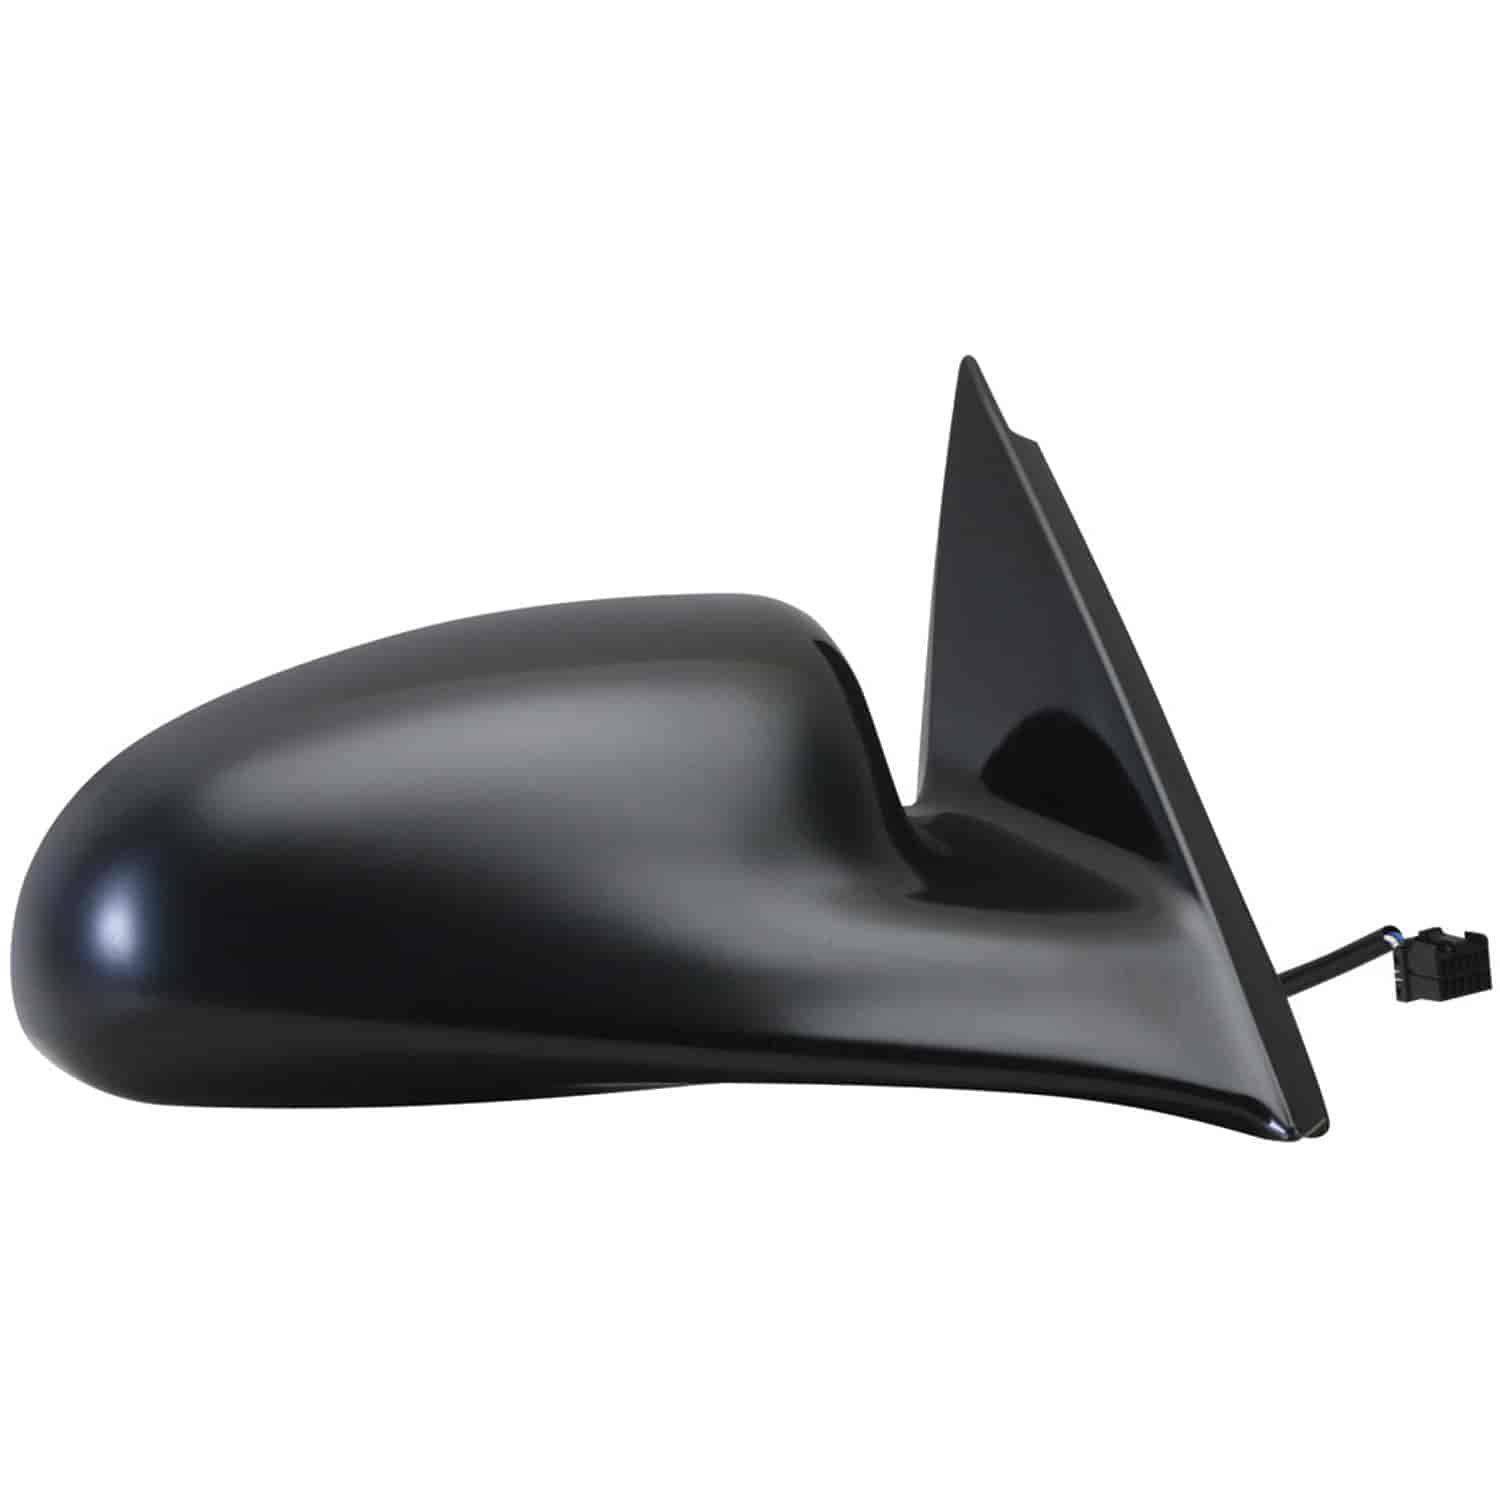 OEM Style Replacement mirror for 00-05 Pontiac Bonneville FWD passenger side mirror tested to fit an